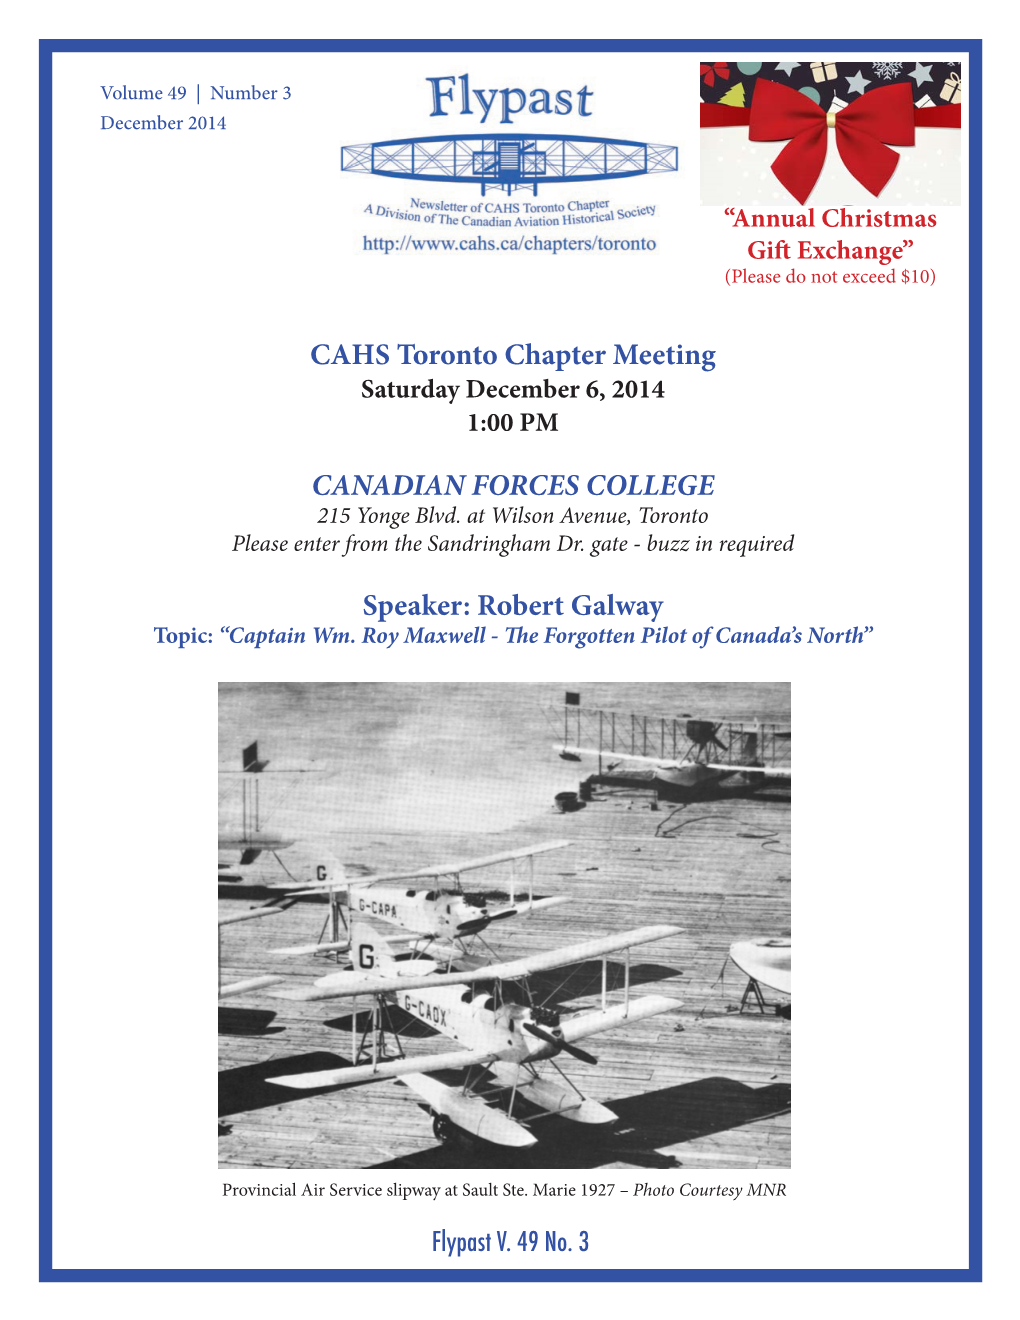 CAHS Toronto Chapter Meeting CANADIAN FORCES COLLEGE